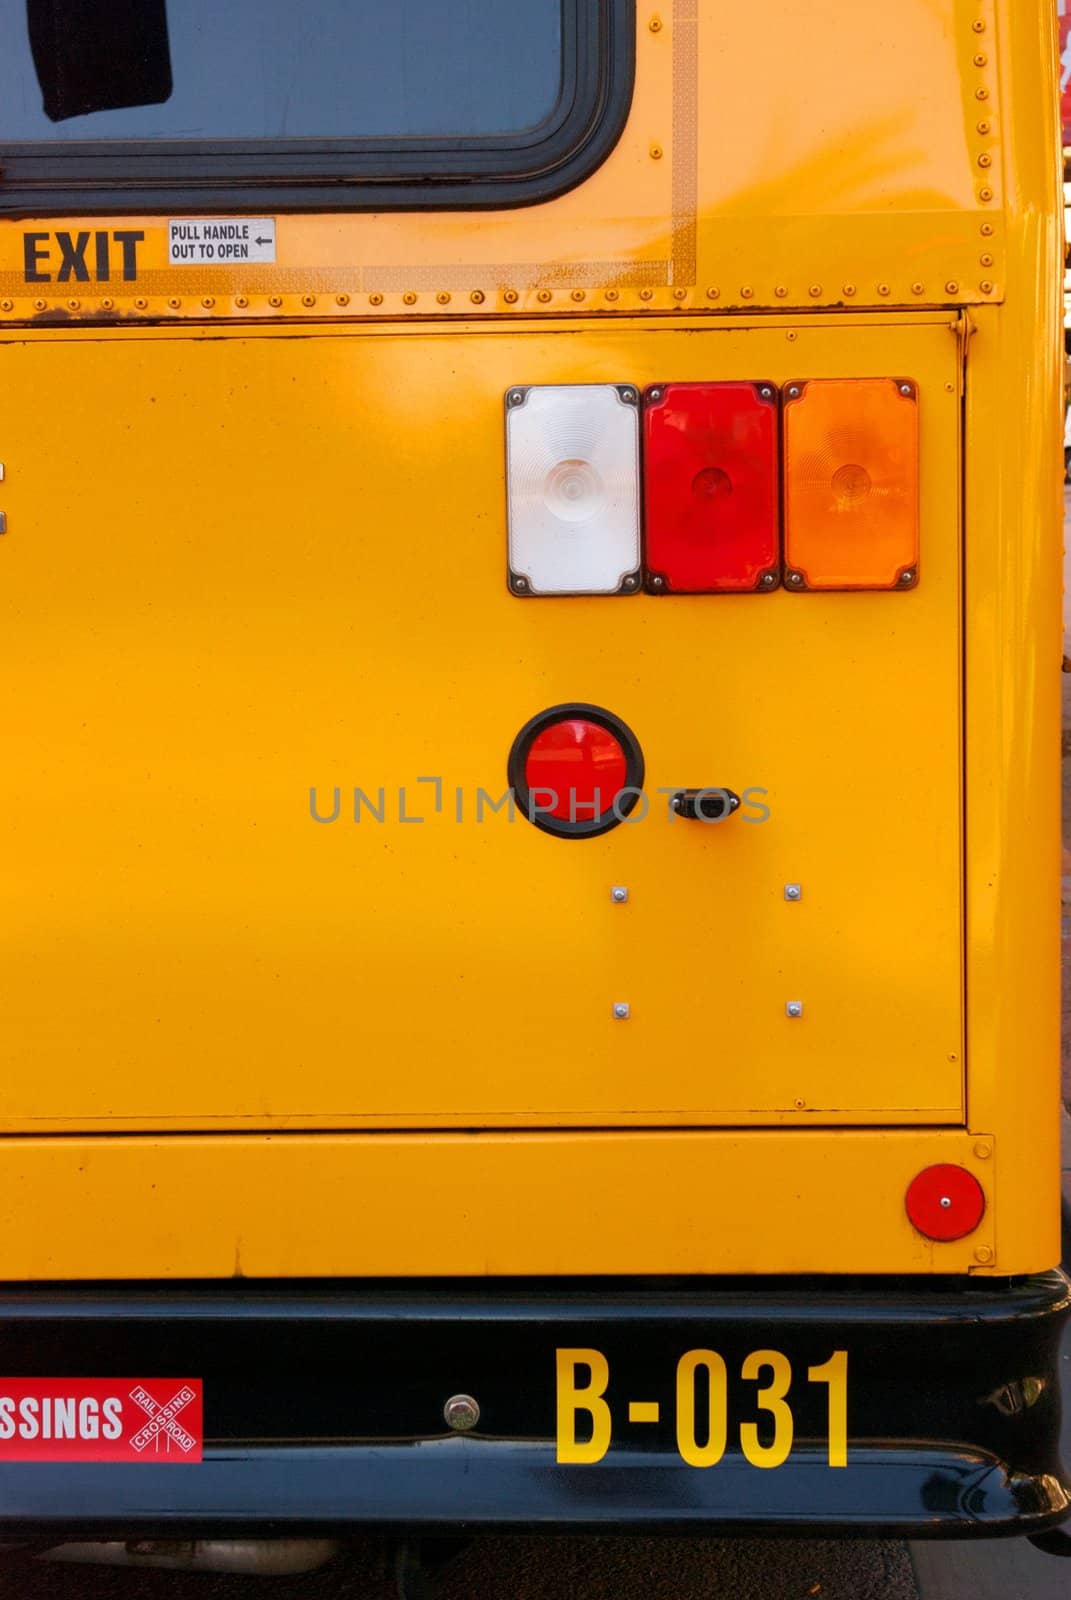 The black bumper of a bright yellow school bus with red and orange tail lights